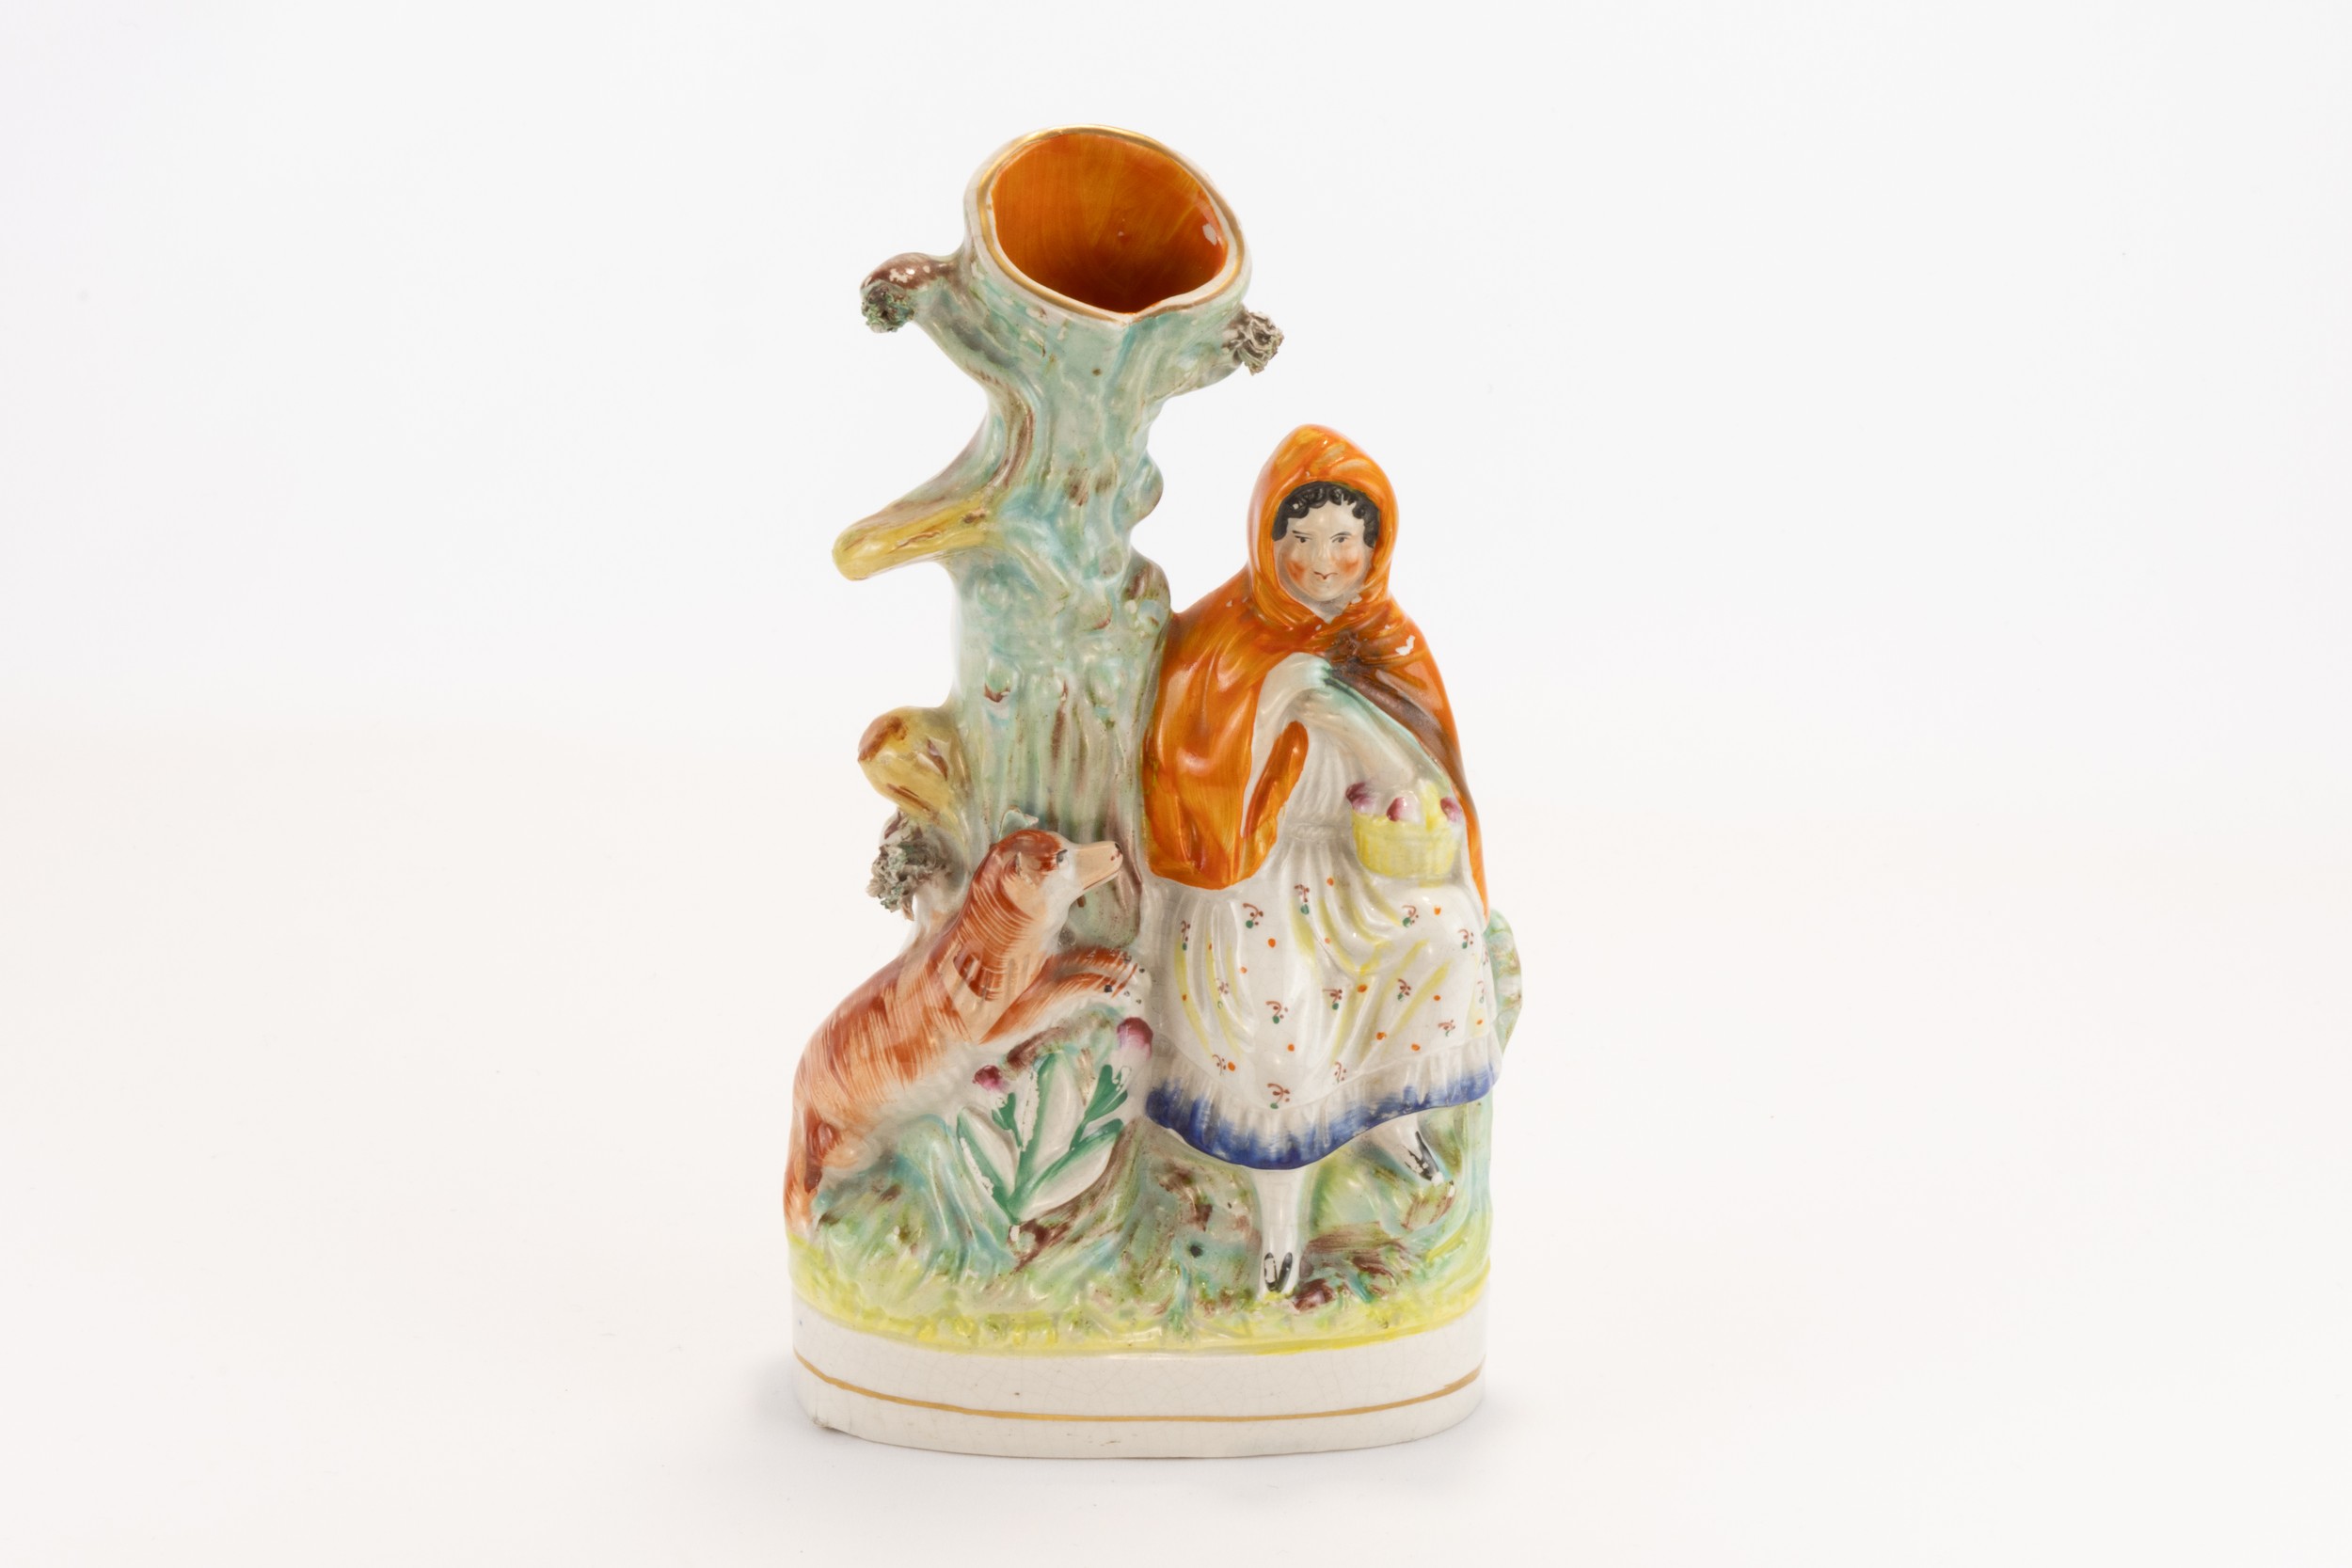 A Mid Victorian Staffordshire Spill Vase Depicting Little Red Riding Hood and the Wolf.

H: Approxim